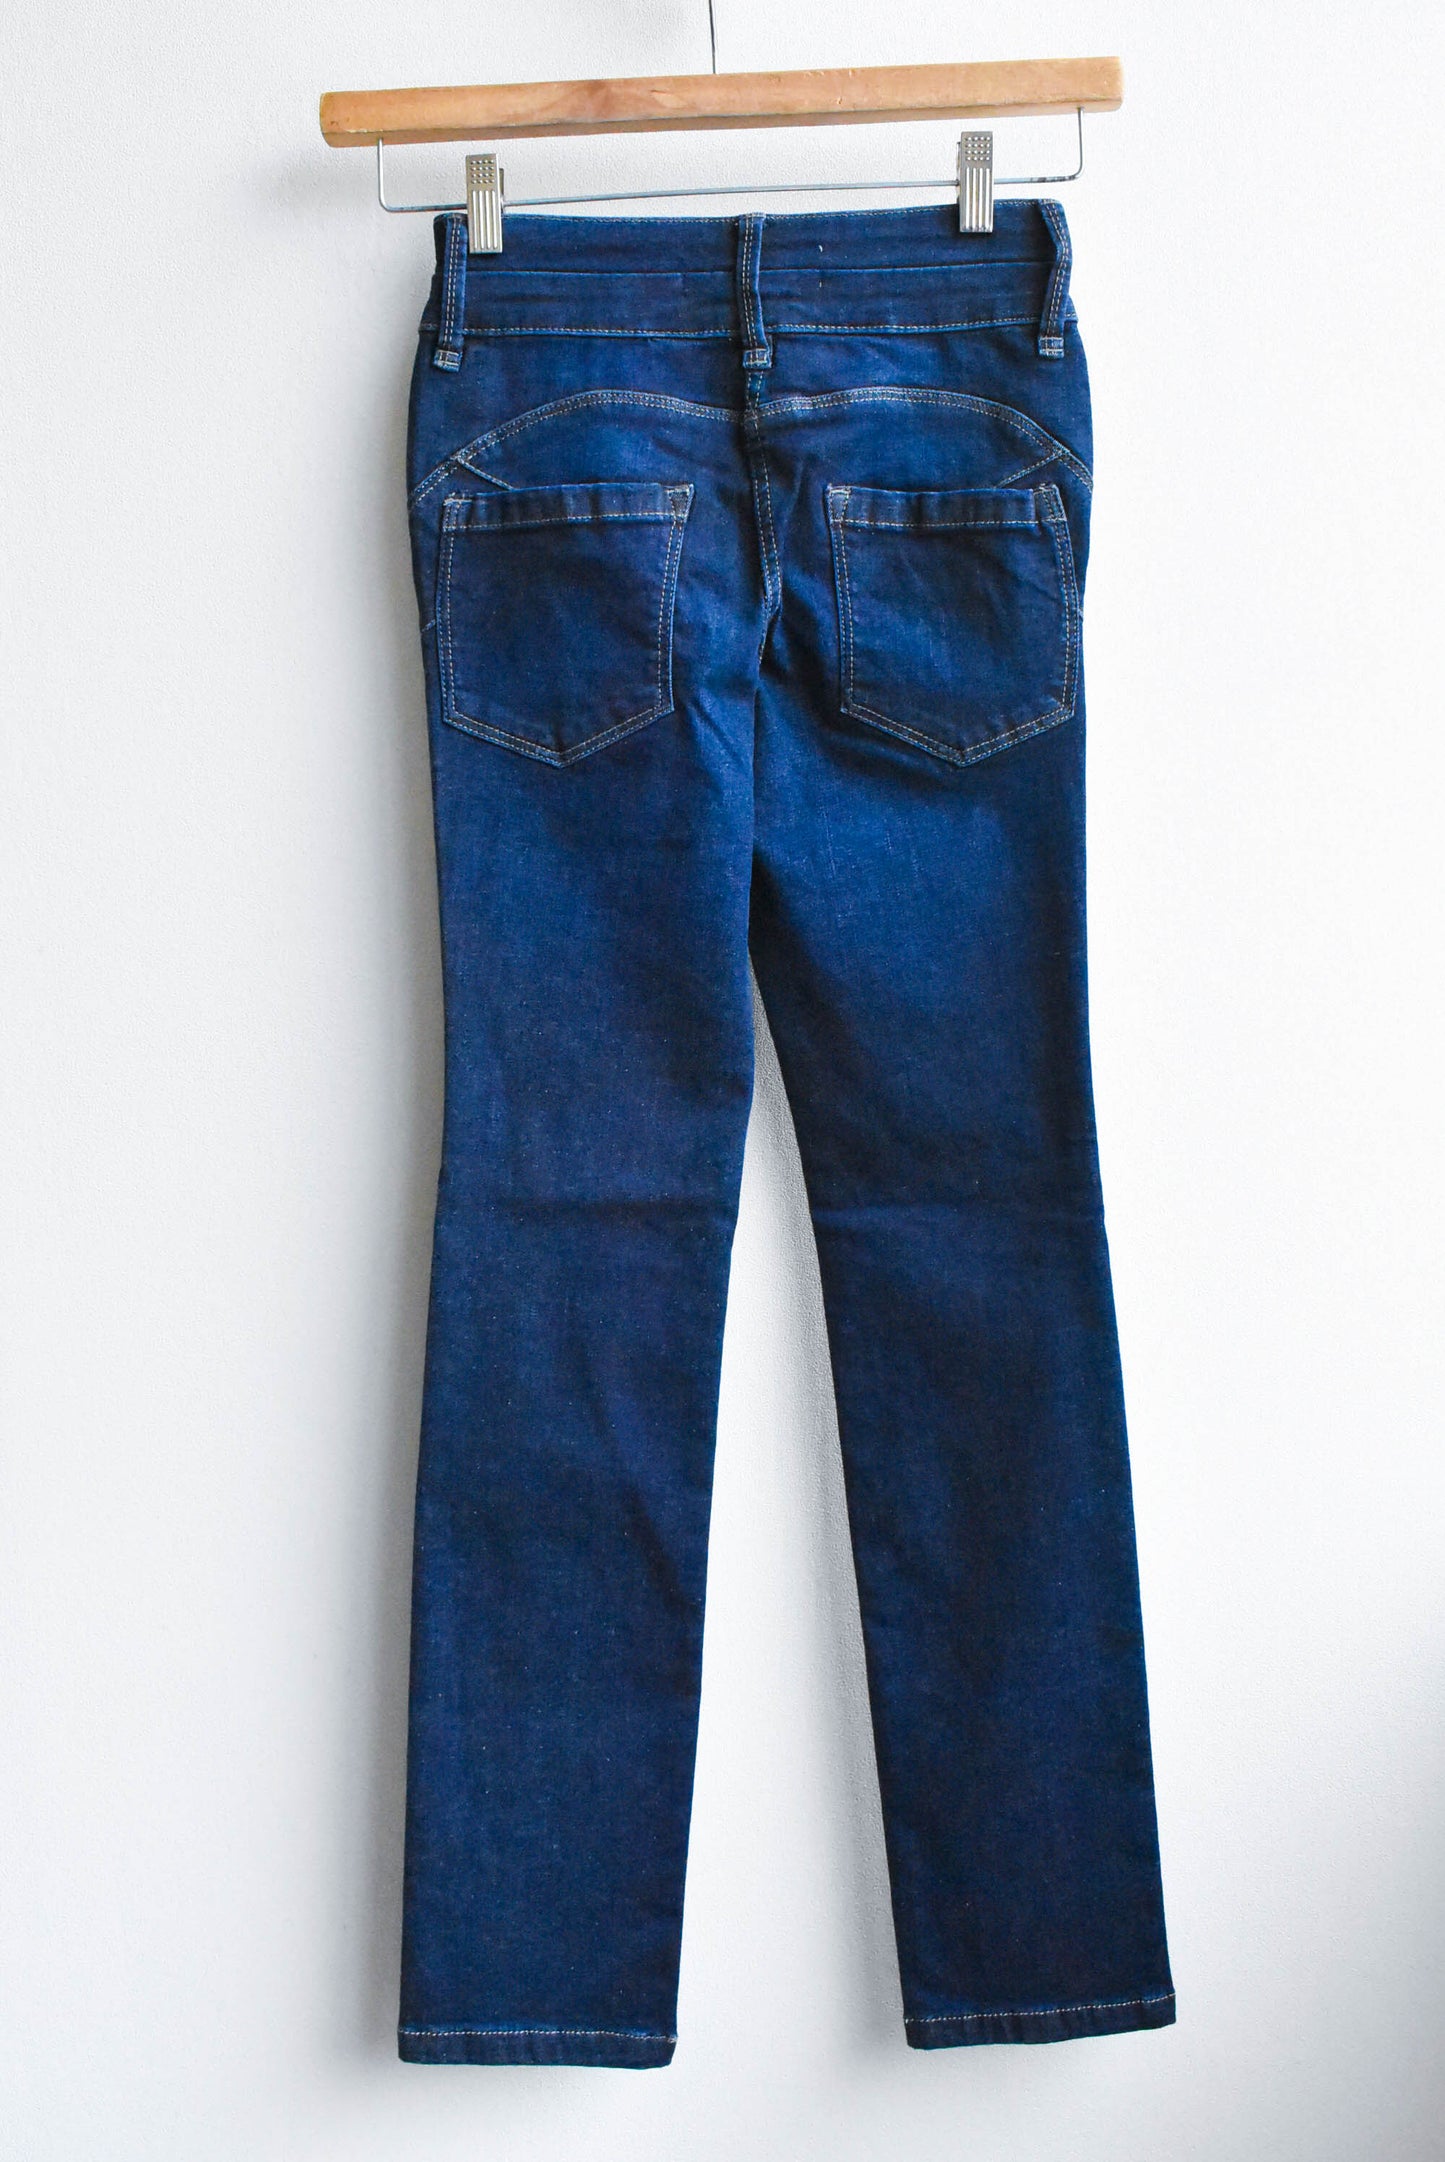 NEW Next Jeans Petite slim high rise jeans, size 6